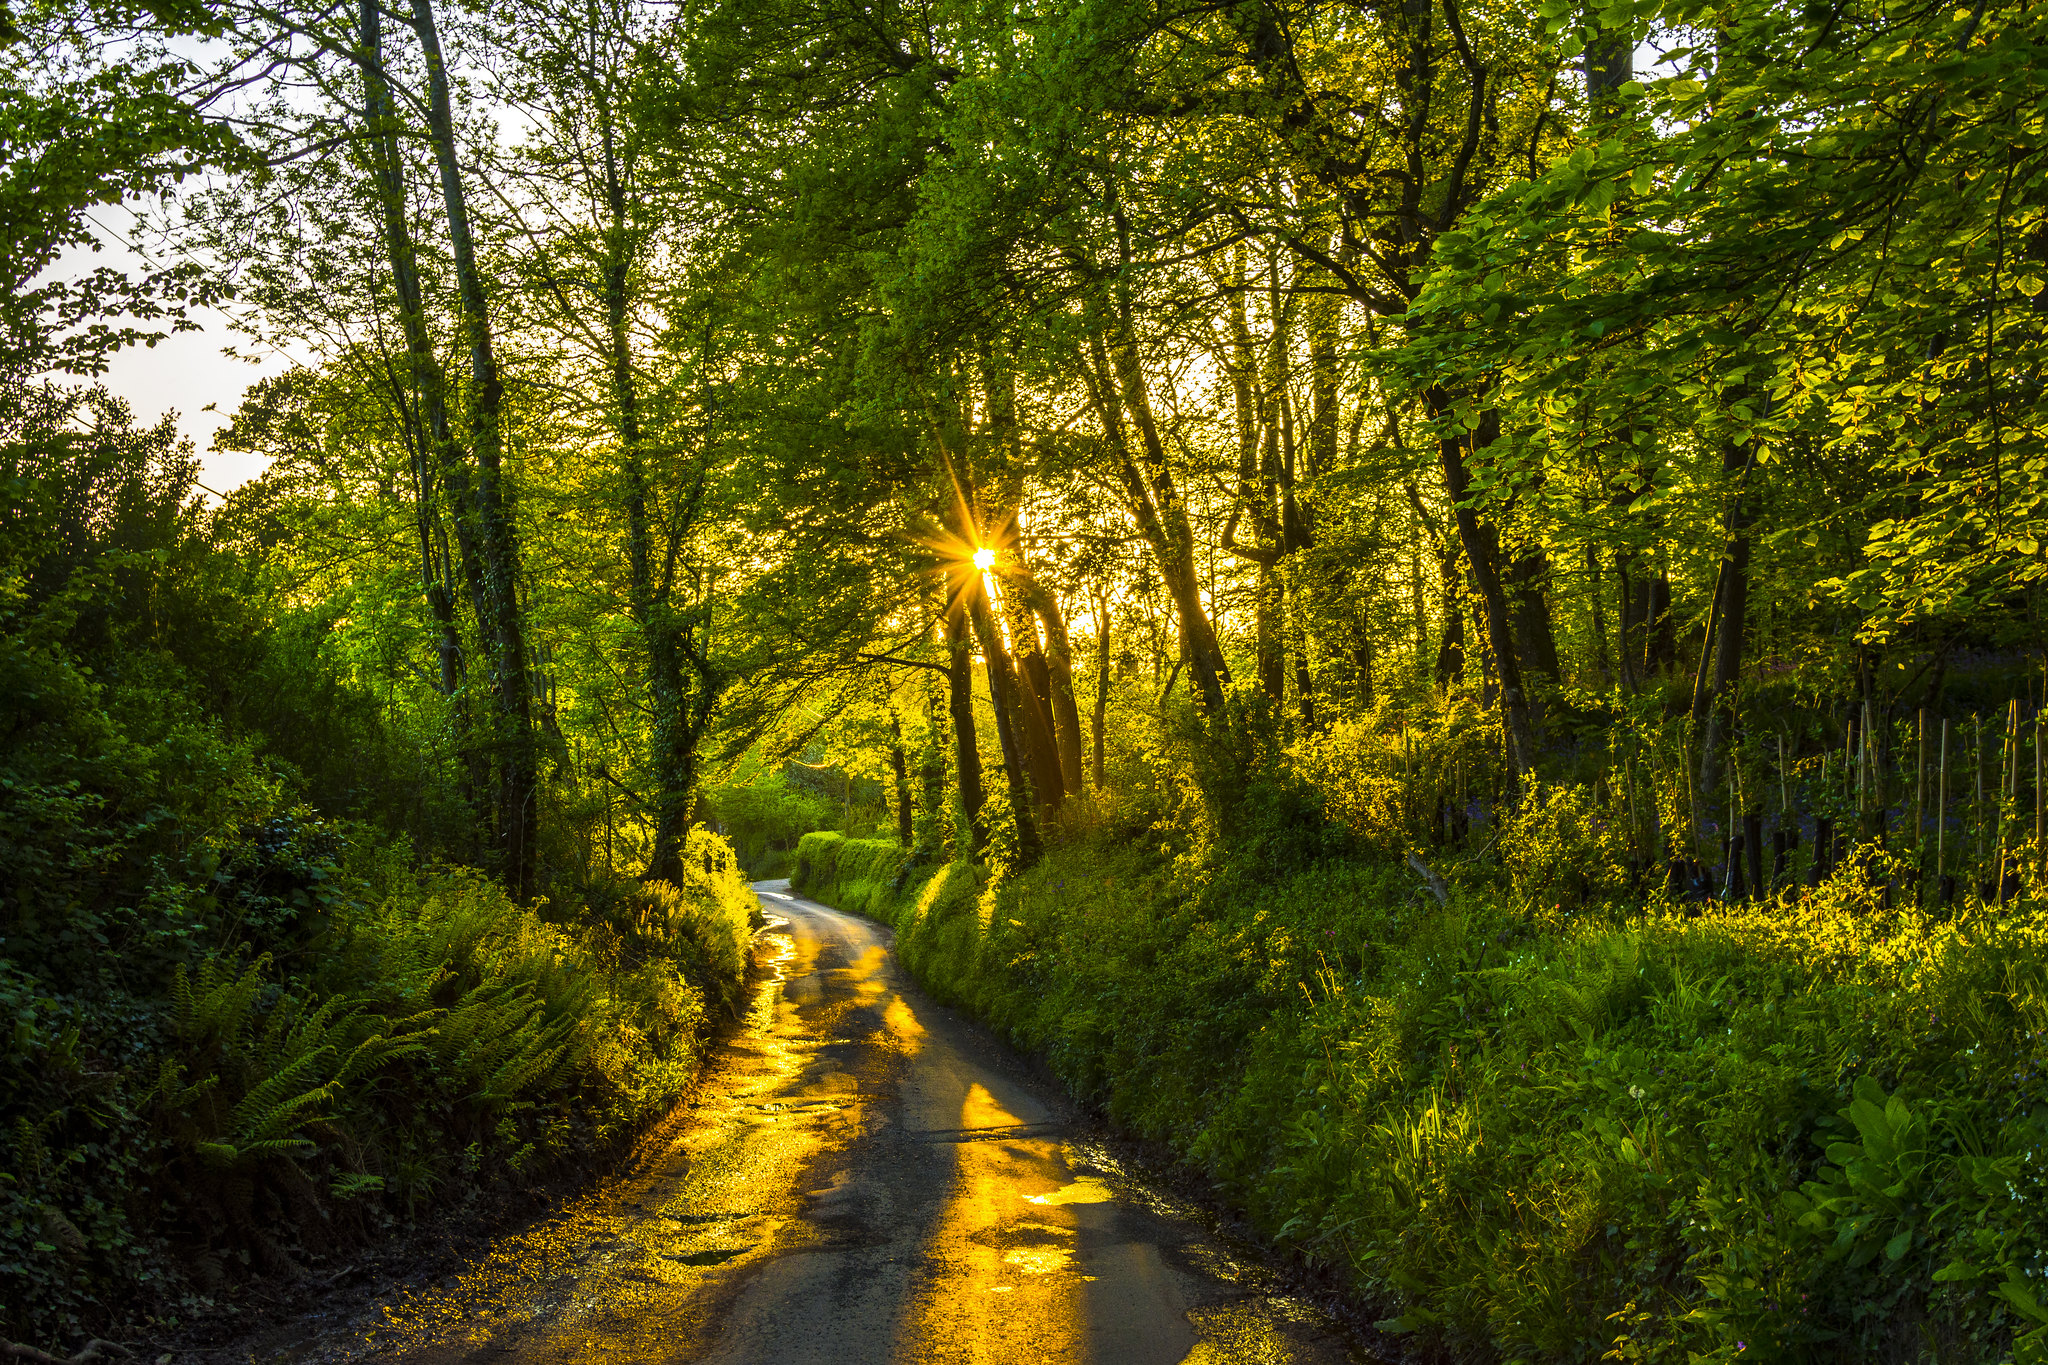 Sun shining on trees and path image by Jack Pease Photography